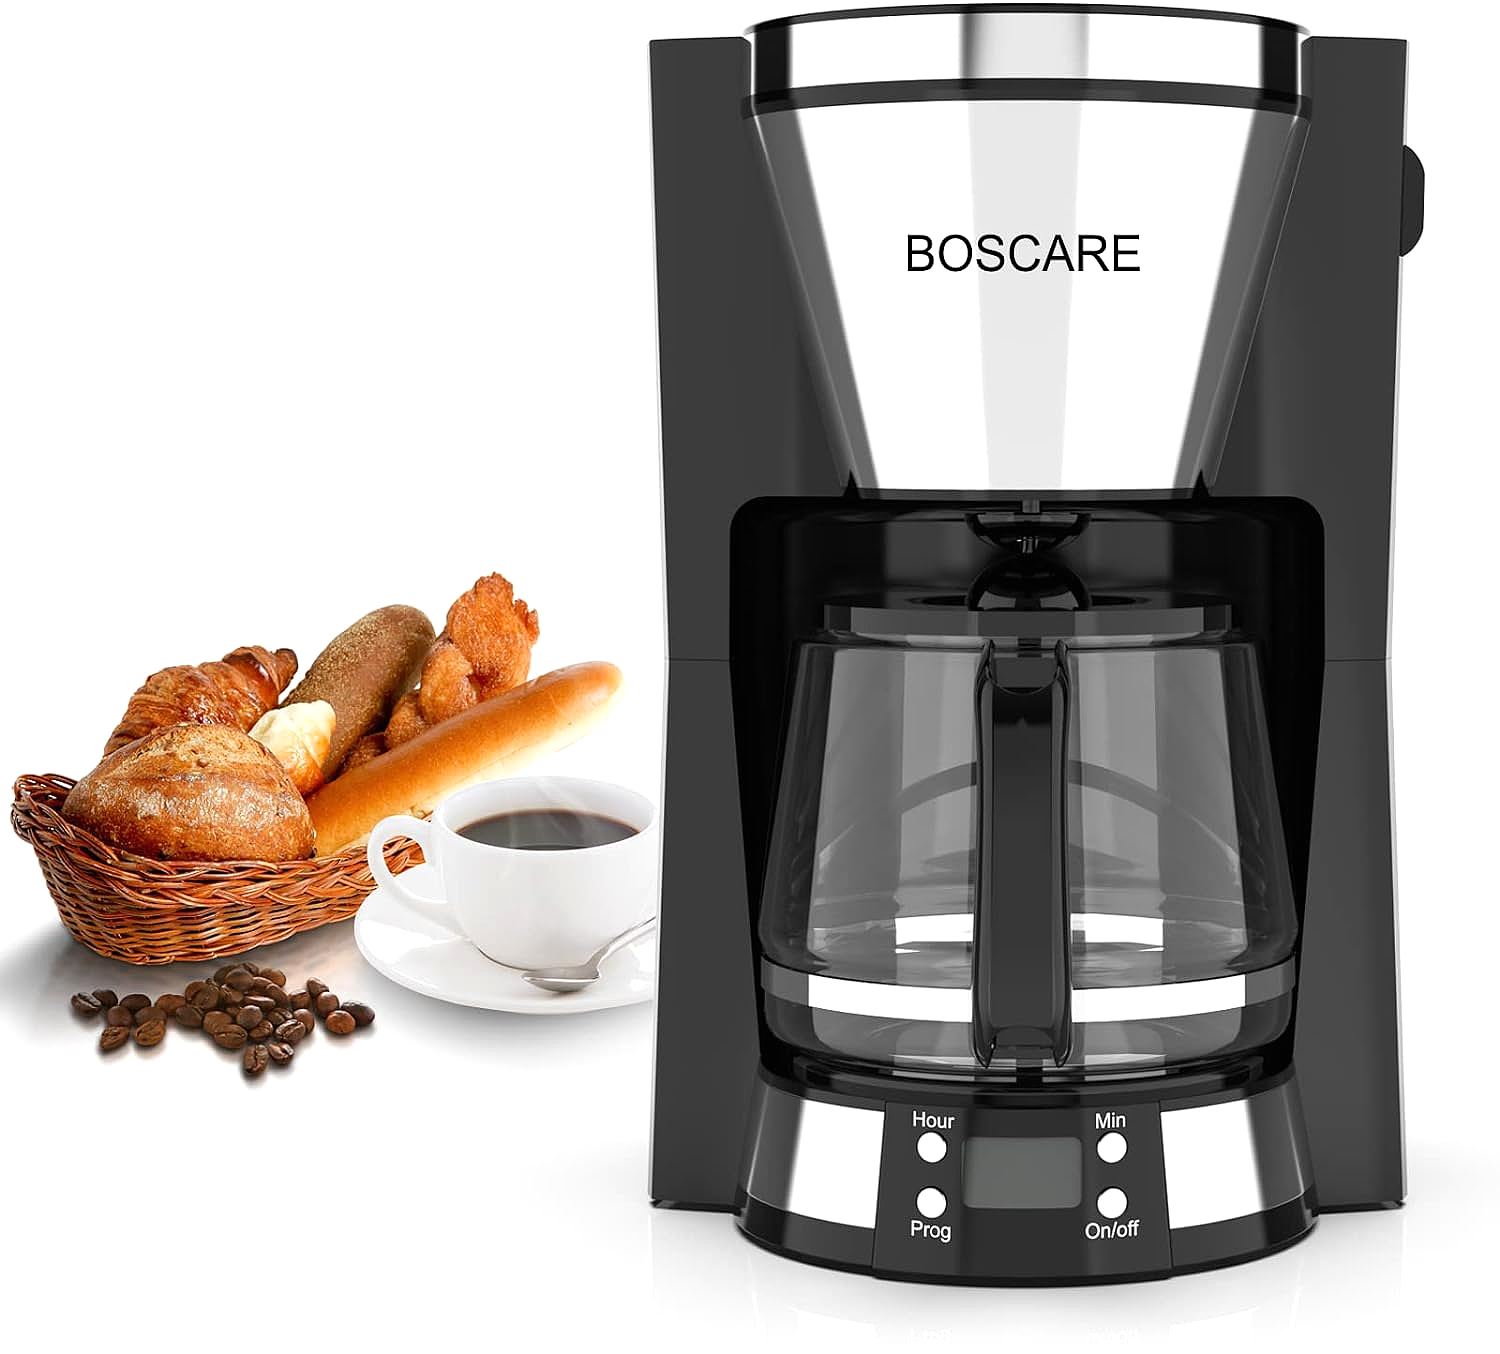 BOSCARE 10-Cup Programmable Coffee Maker - Smart Timer, Anti-Drip, Quick Brew, Highly Recommended